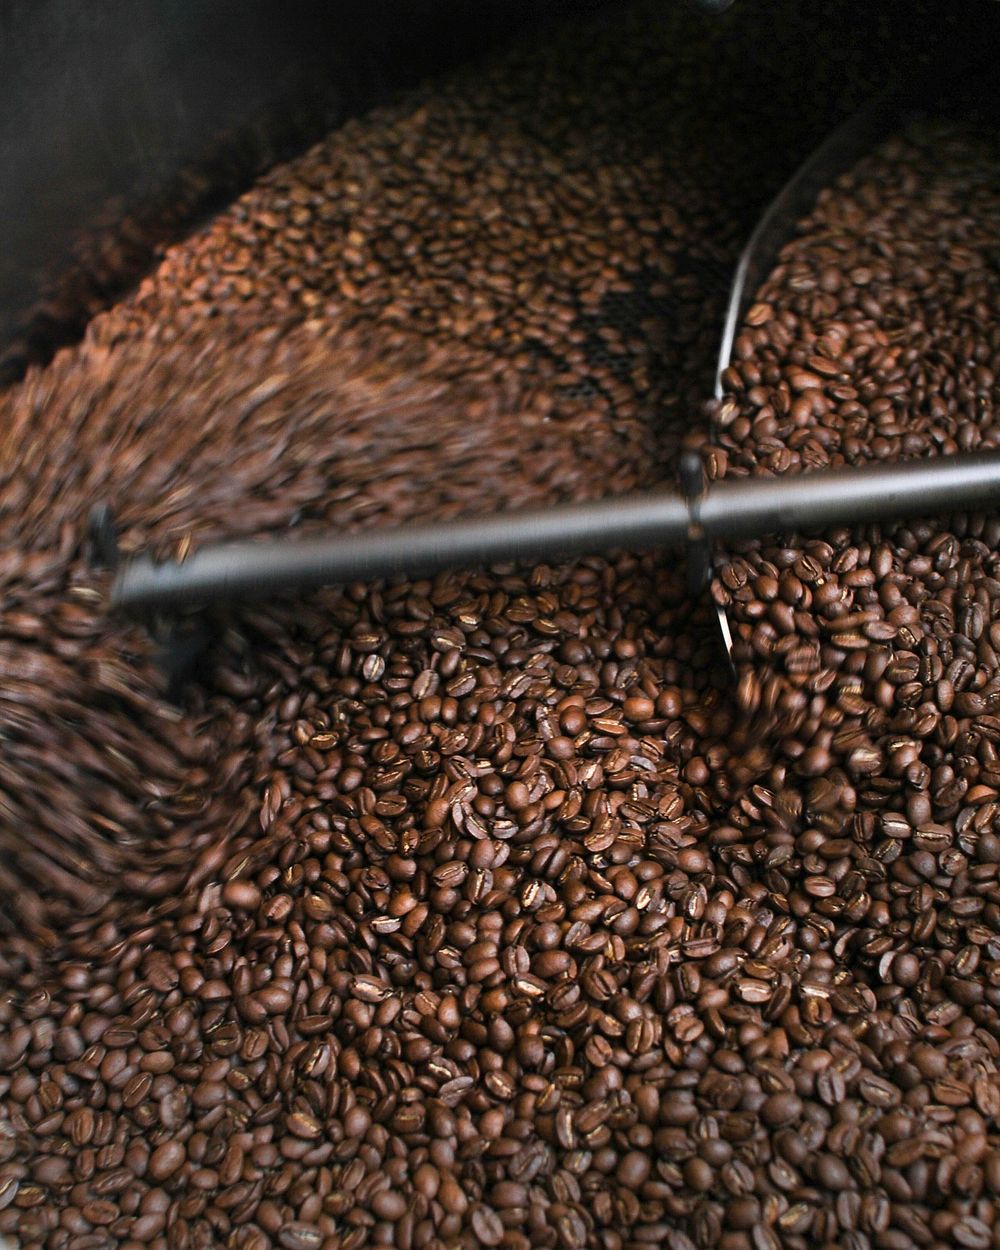 Free coffee being roasted image, public domain food CC0 photo.